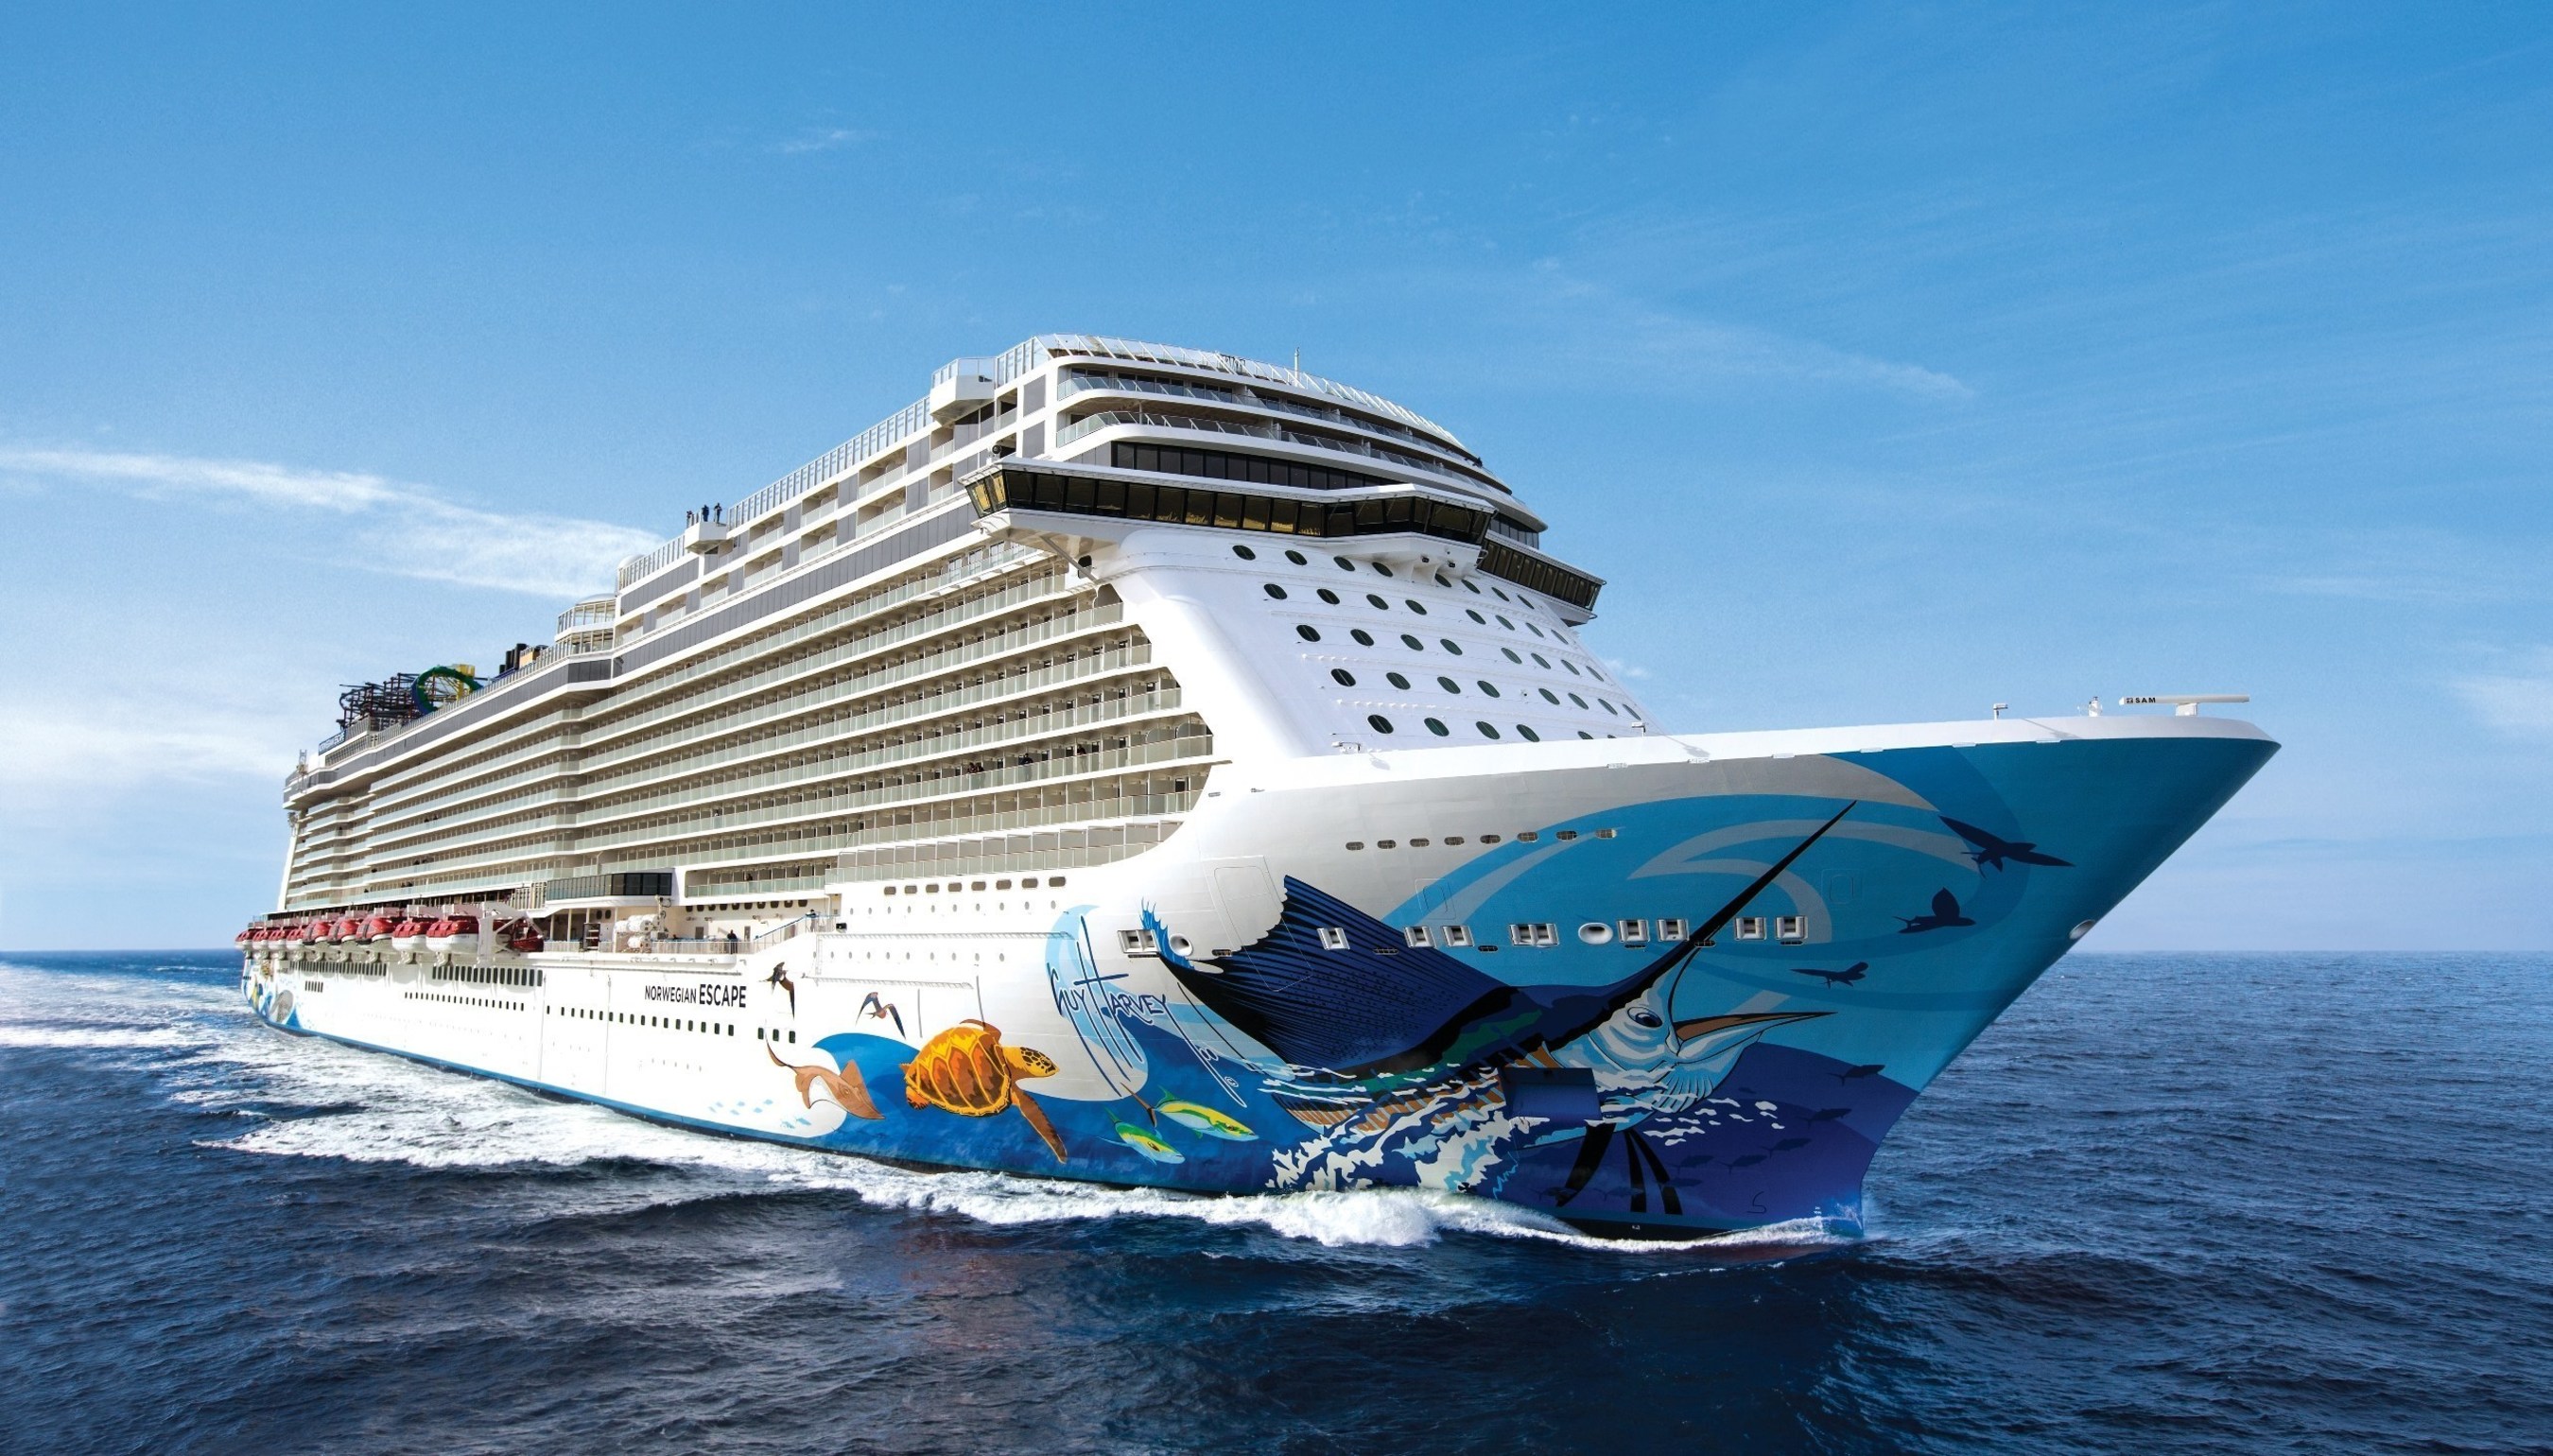 Thanks to EMC, Norwegian Escape broke the record for social media usage at sea during its recent inaugural voyage.